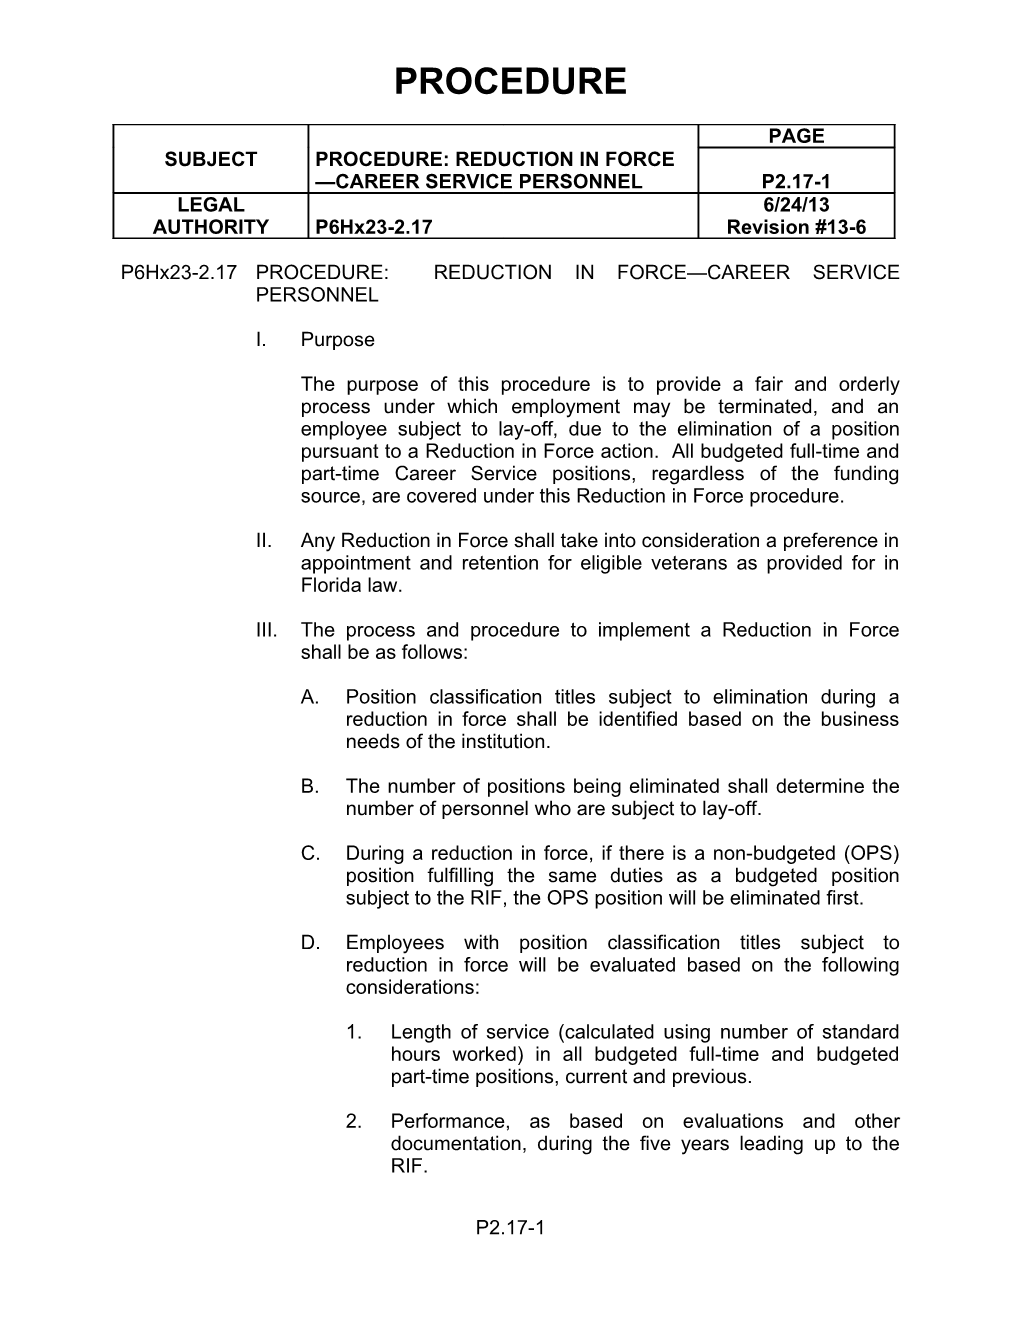 P6hx23-2.17PROCEDURE: REDUCTION in FORCE CAREER SERVICE PERSONNEL